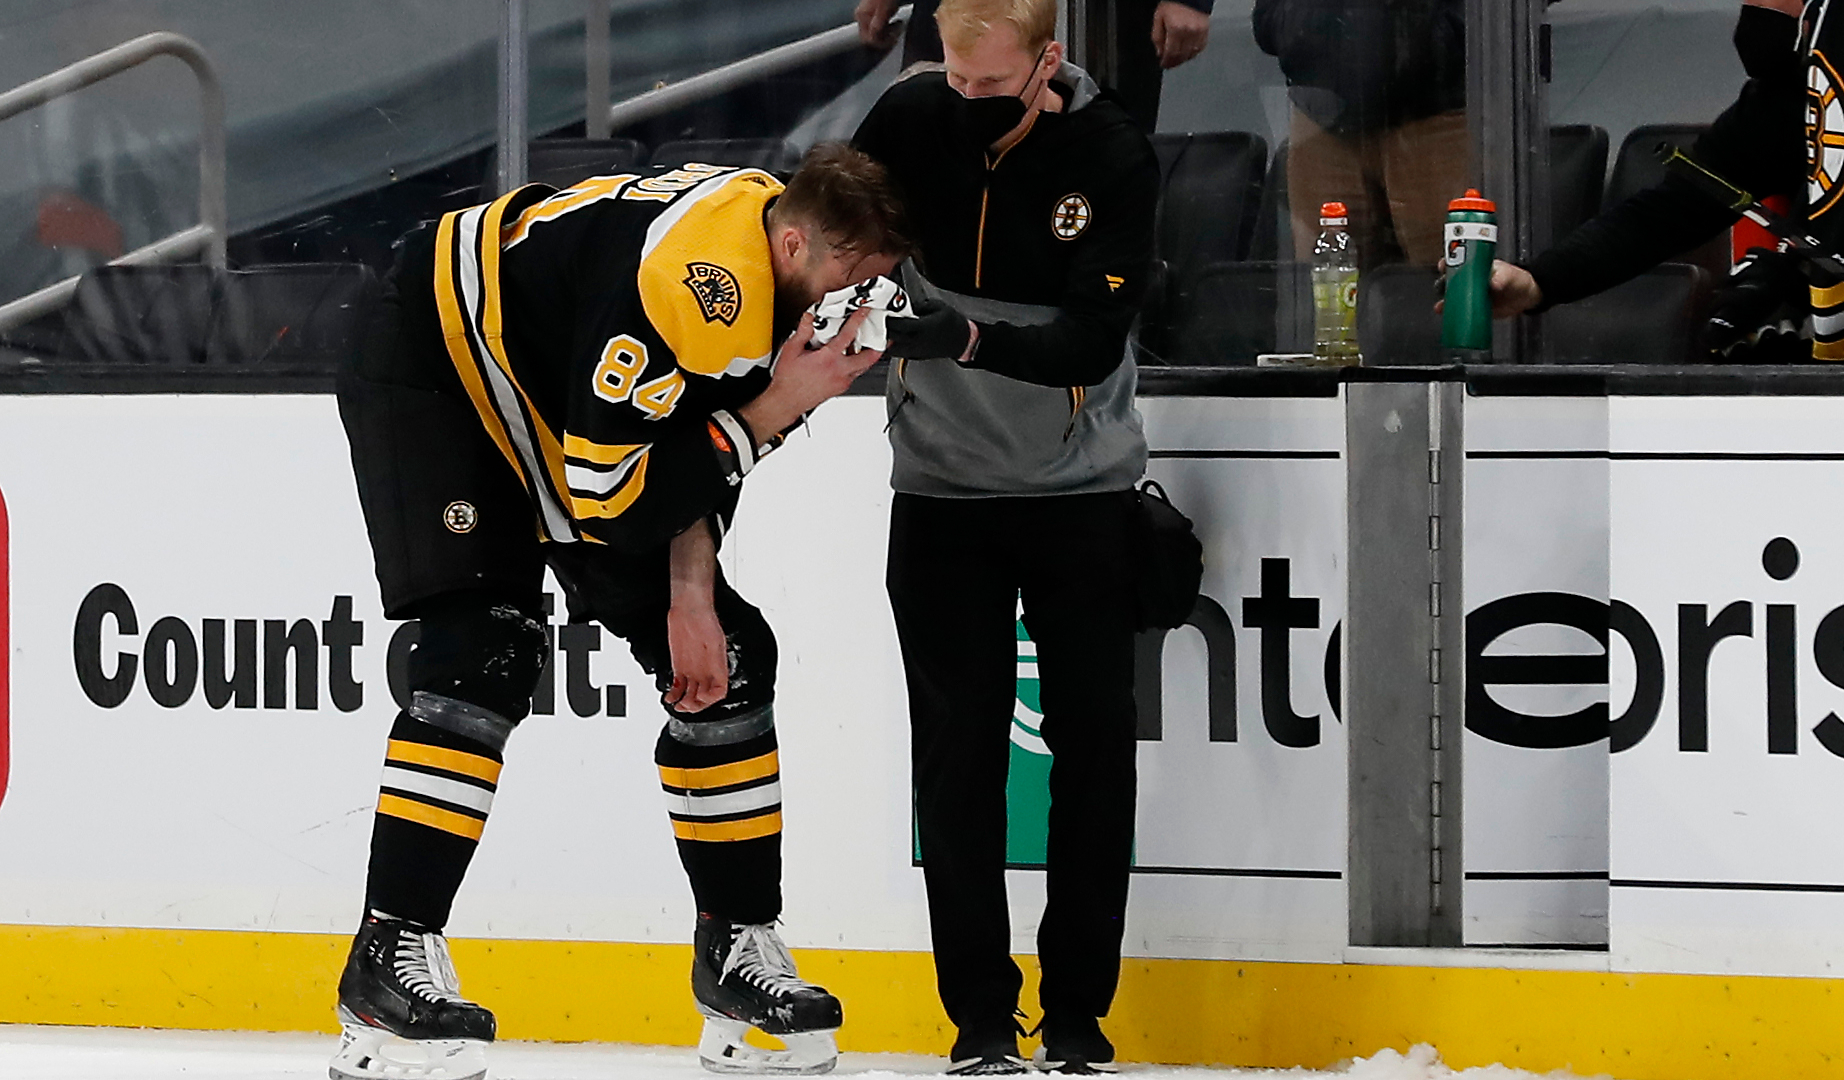 Garnet Hathaway Ejected in Third Period as Rivalry Builds With Boston